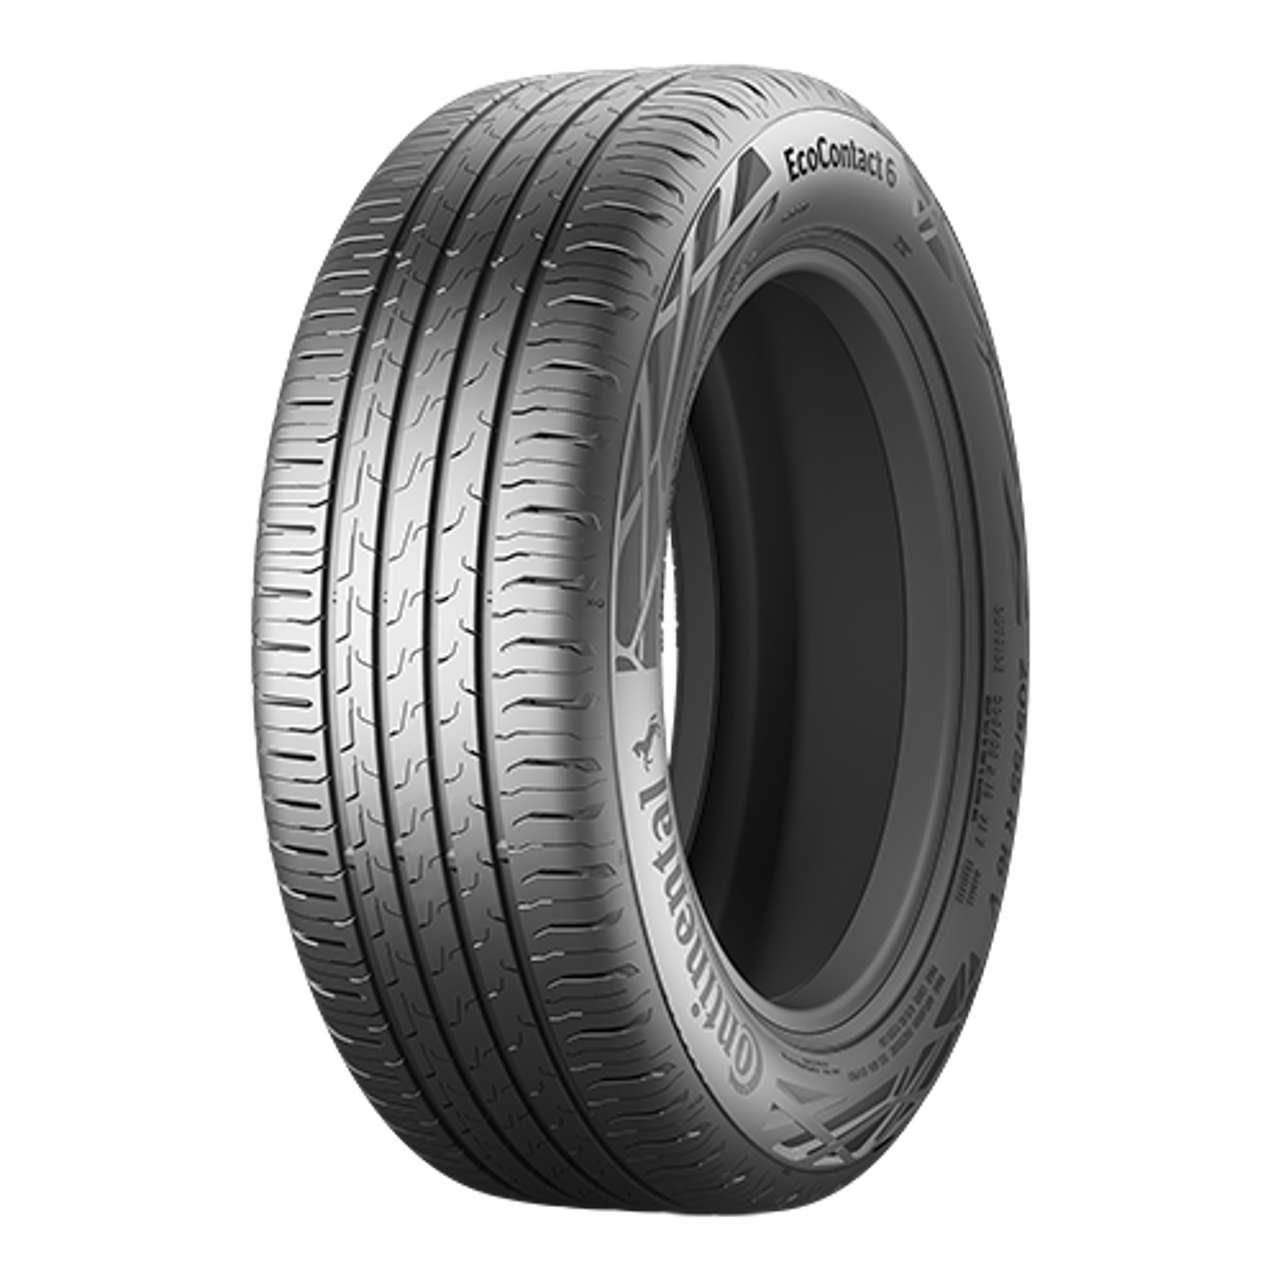 CONTINENTAL ECOCONTACT 6Q 195/55R16 91V BSW